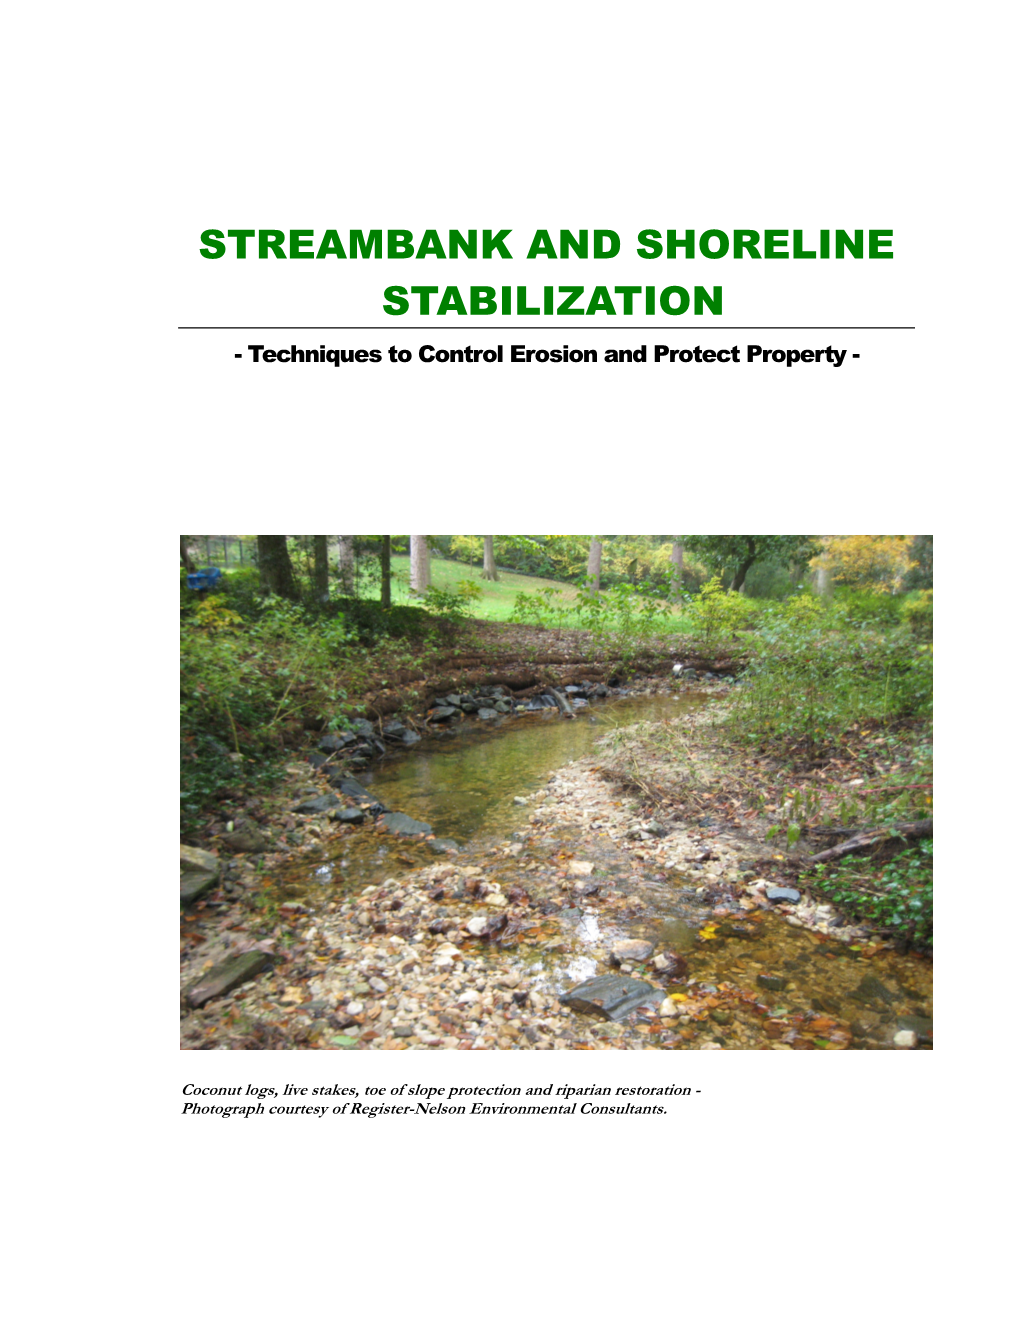 STREAMBANK and SHORELINE STABILIZATION - Techniques to Control Erosion and Protect Property